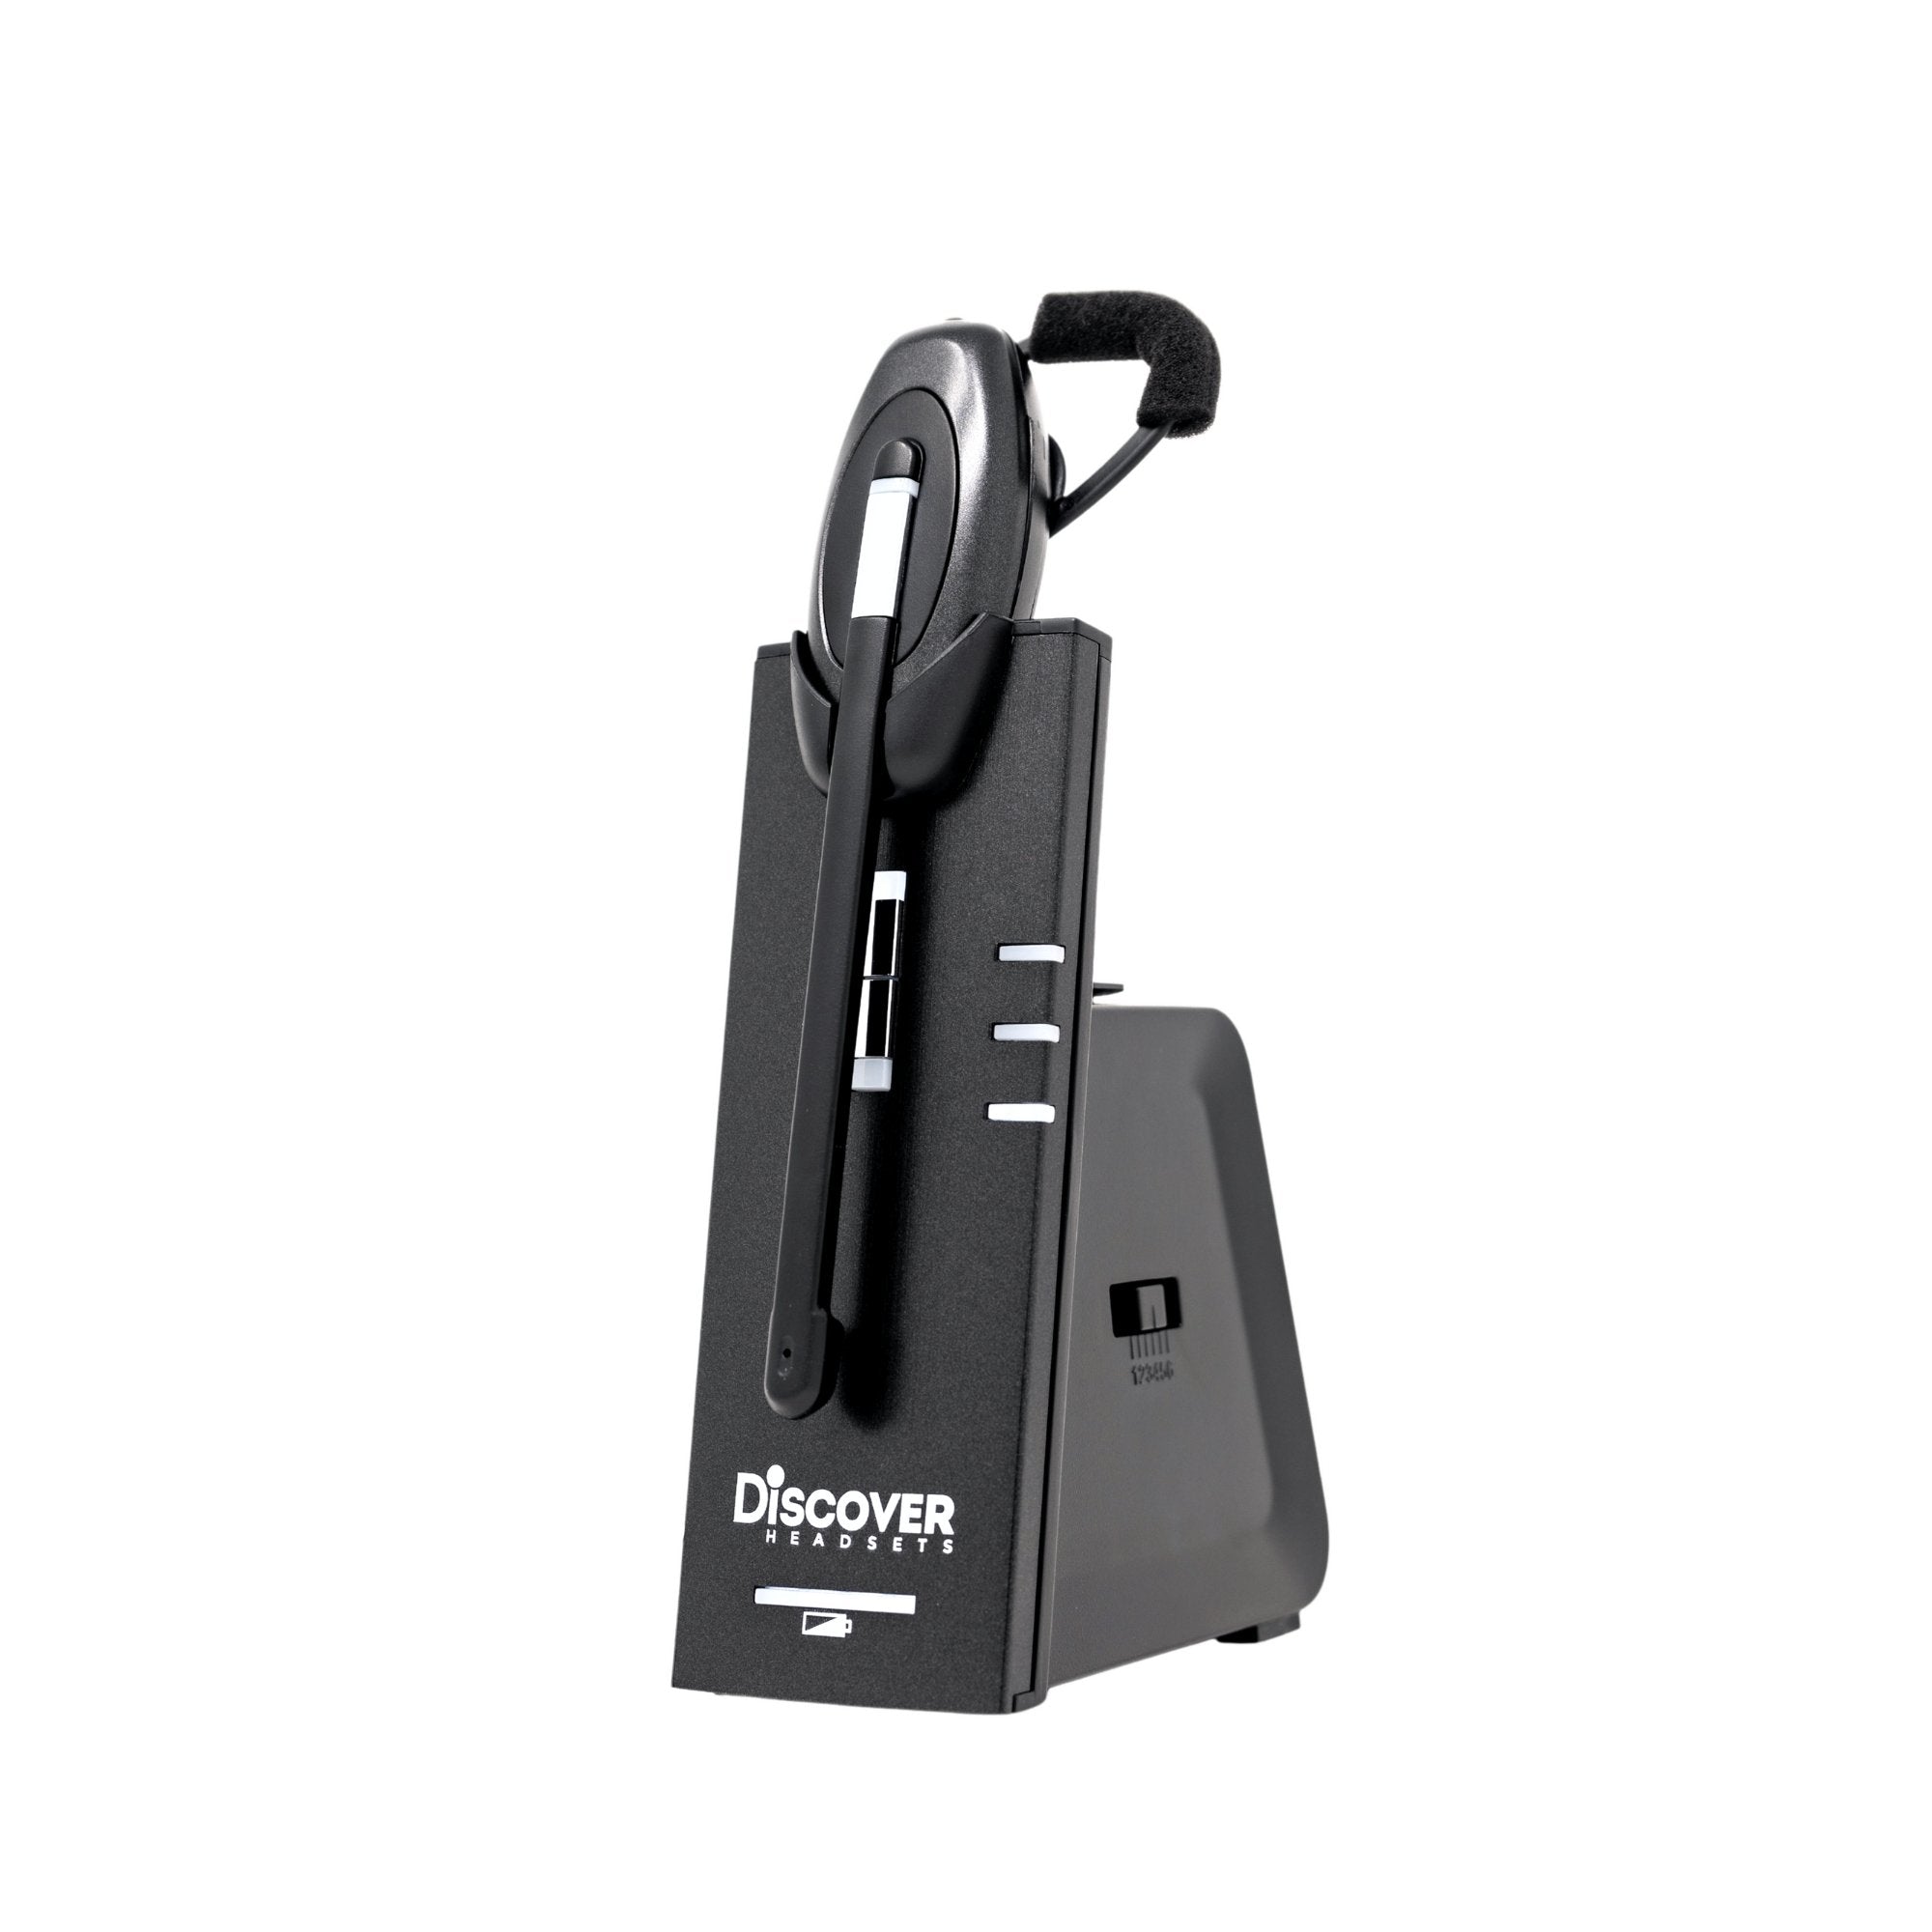 Discover D904 Convertible DECT Wireless Office Headset - Headset Advisor